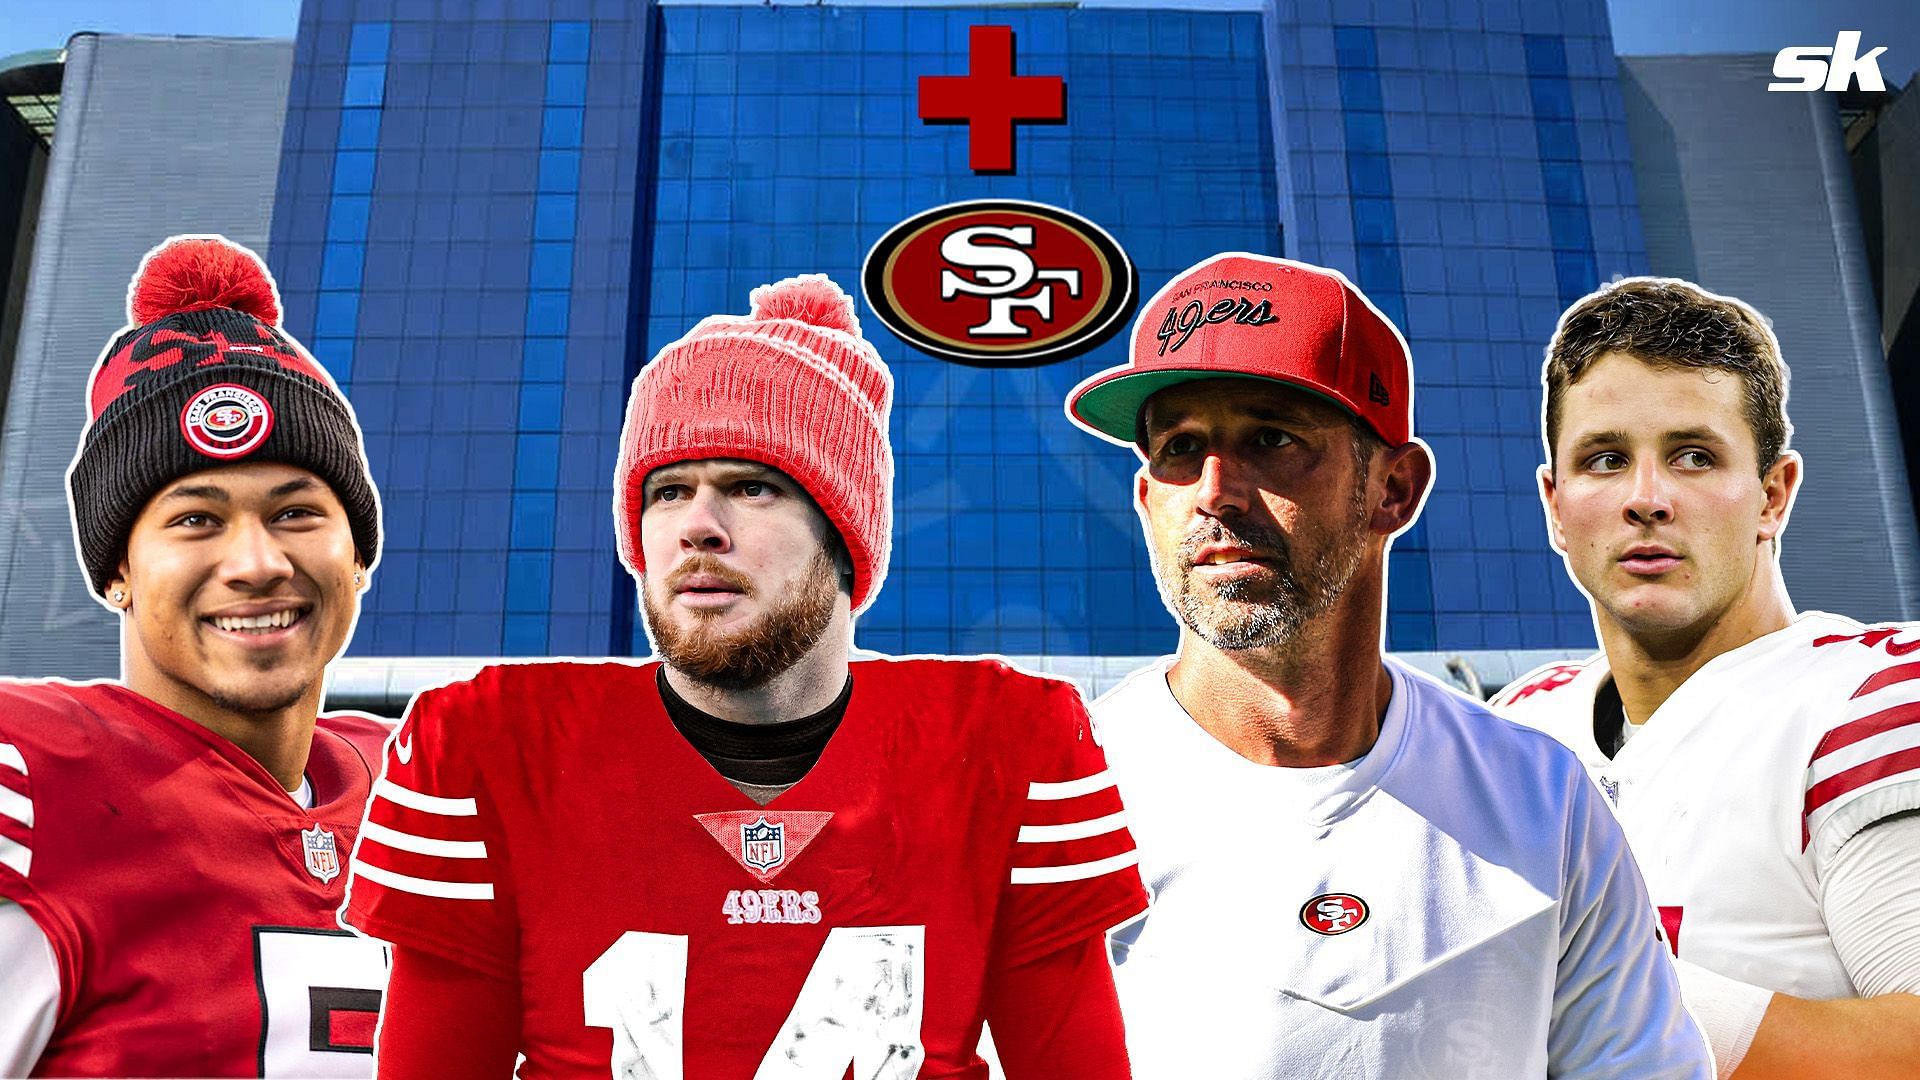 Kyle Shanahan and the 49ers are under pressure to win Super Bowl